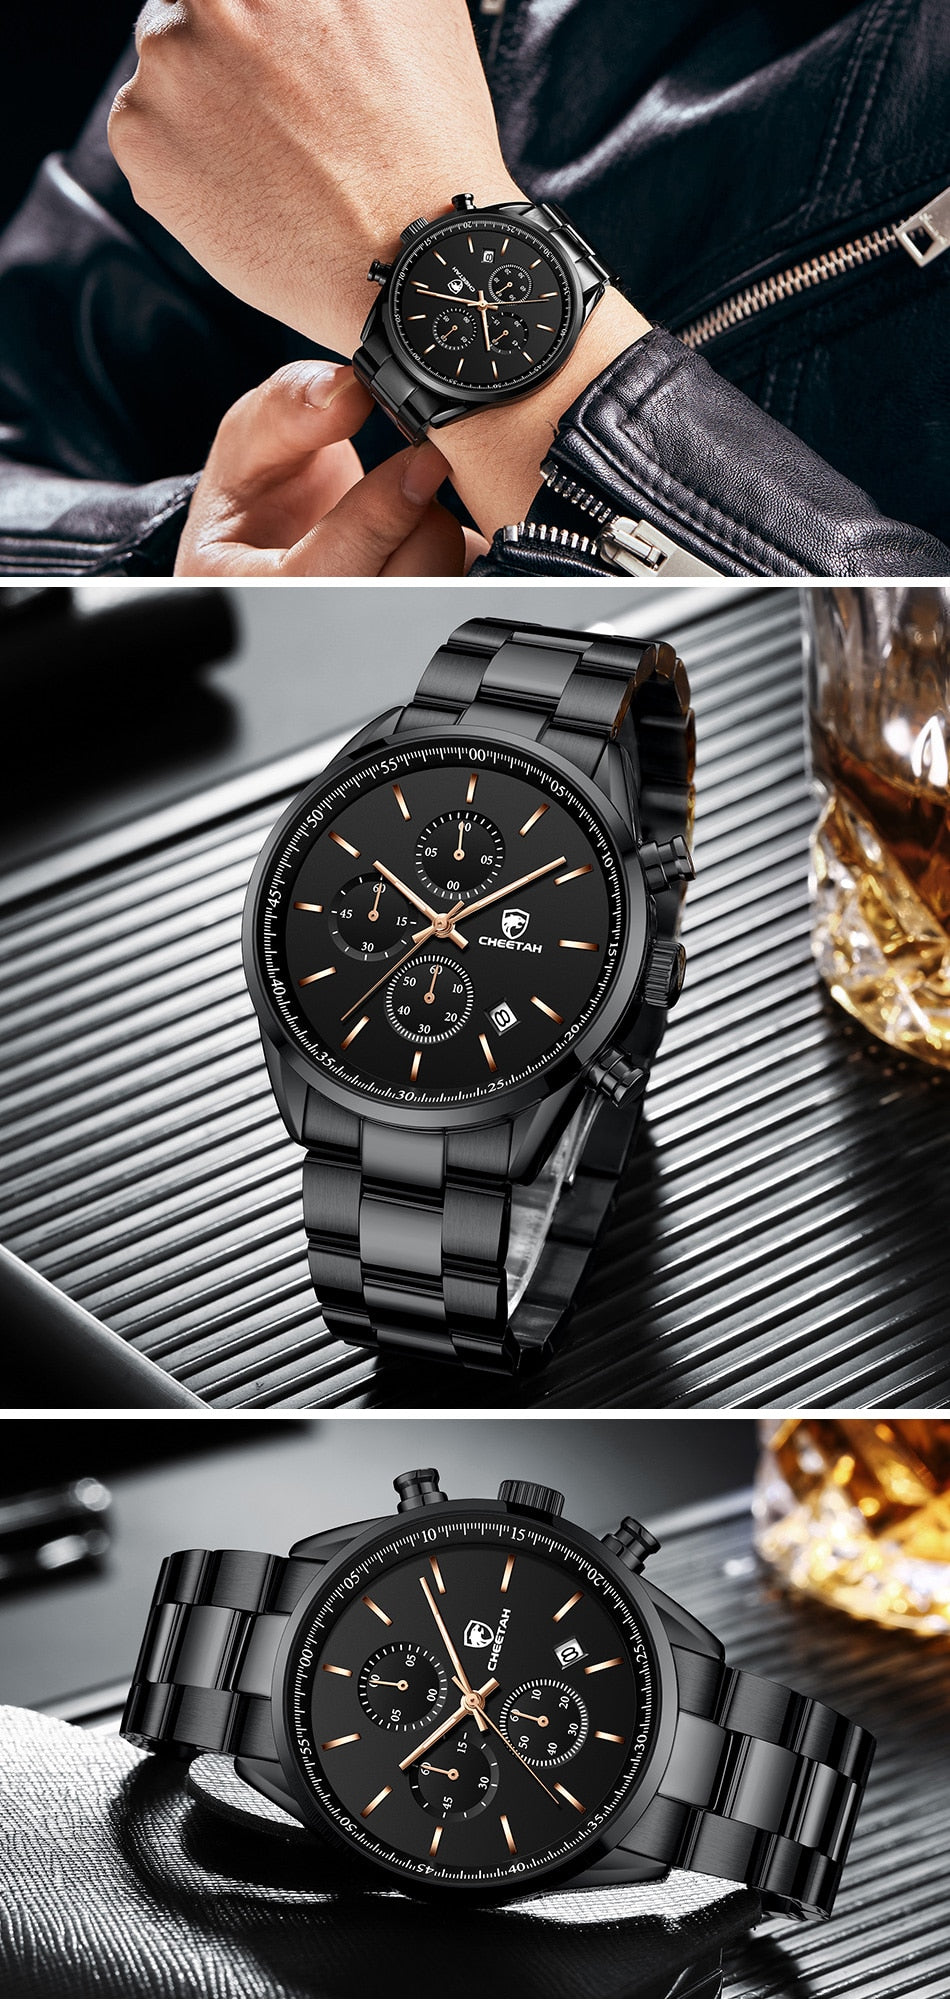 CHEETAH Casual Business Watches for Men Top Brand Luxury Black